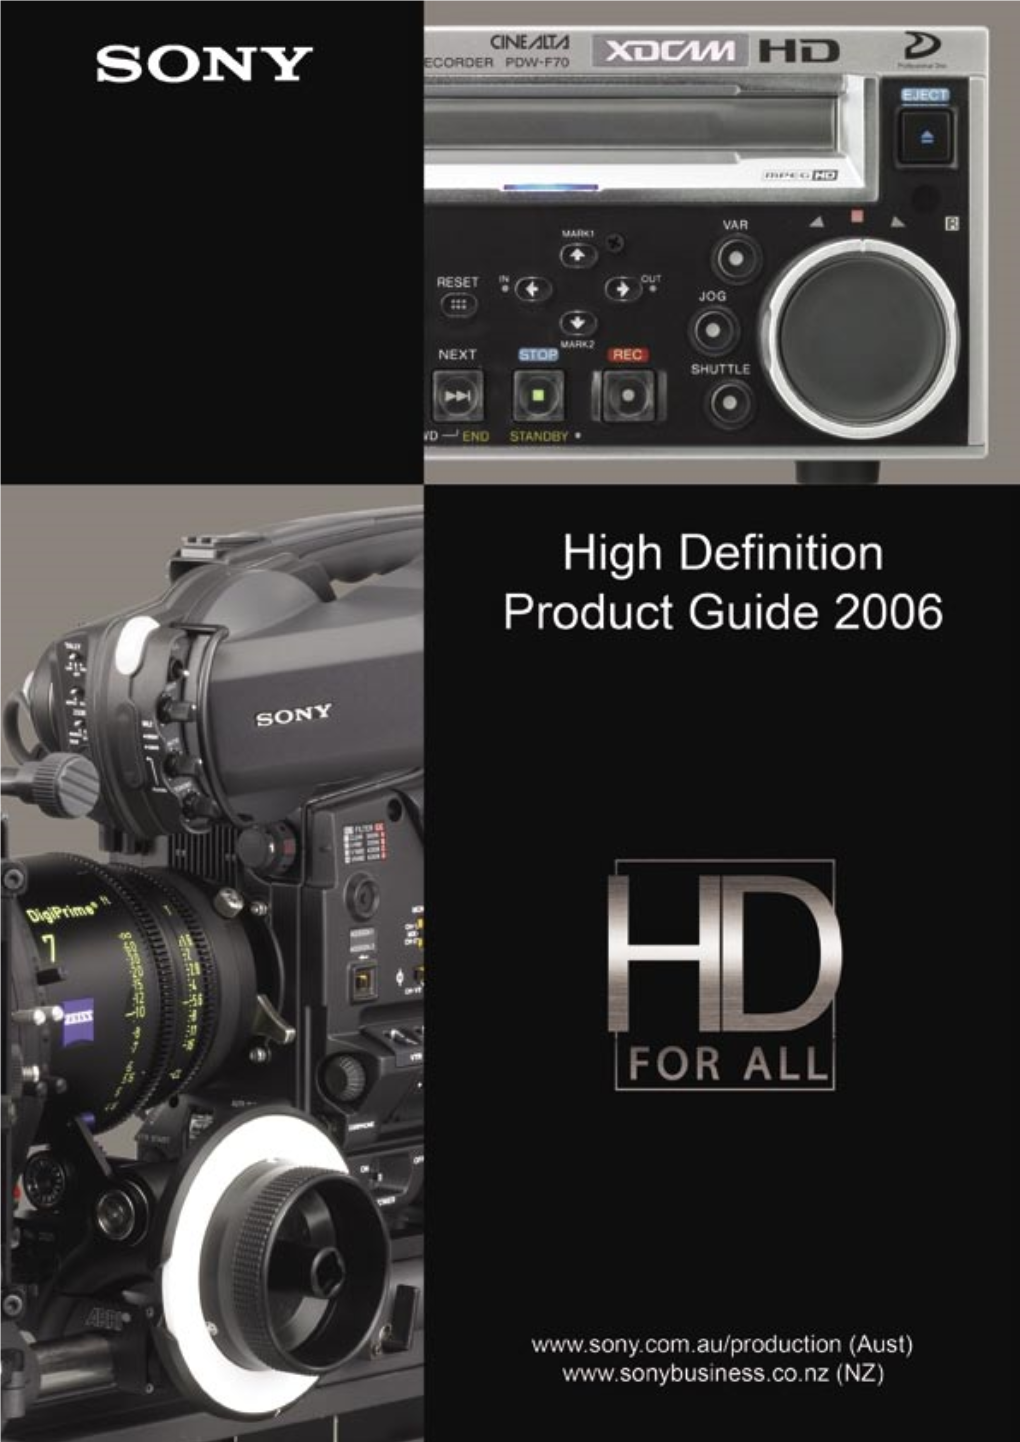 Sony High Definition Product Guide 2006